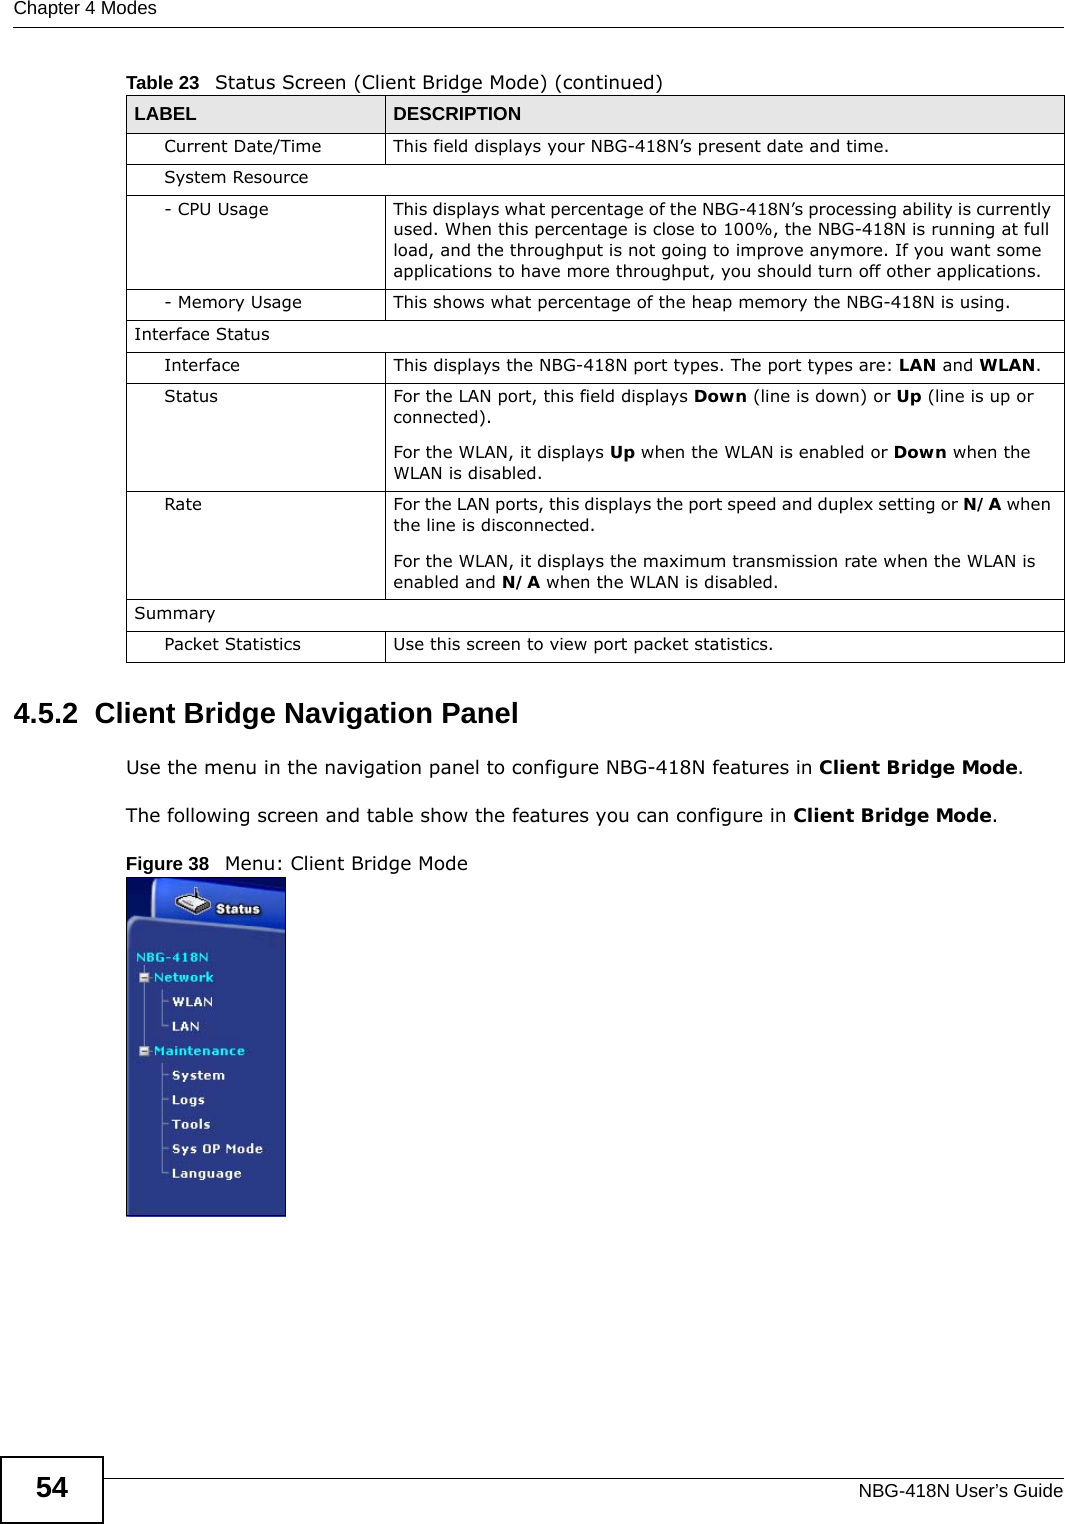 Chapter 4 ModesNBG-418N User’s Guide544.5.2  Client Bridge Navigation PanelUse the menu in the navigation panel to configure NBG-418N features in Client Bridge Mode.The following screen and table show the features you can configure in Client Bridge Mode.Figure 38   Menu: Client Bridge ModeCurrent Date/Time This field displays your NBG-418N’s present date and time.System Resource- CPU Usage This displays what percentage of the NBG-418N’s processing ability is currently used. When this percentage is close to 100%, the NBG-418N is running at full load, and the throughput is not going to improve anymore. If you want some applications to have more throughput, you should turn off other applications.- Memory Usage This shows what percentage of the heap memory the NBG-418N is using. Interface StatusInterface This displays the NBG-418N port types. The port types are: LAN and WLAN.Status For the LAN port, this field displays Down (line is down) or Up (line is up or connected).For the WLAN, it displays Up when the WLAN is enabled or Down when the WLAN is disabled.Rate For the LAN ports, this displays the port speed and duplex setting or N/A when the line is disconnected.For the WLAN, it displays the maximum transmission rate when the WLAN is enabled and N/A when the WLAN is disabled.SummaryPacket Statistics Use this screen to view port packet statistics.Table 23   Status Screen (Client Bridge Mode) (continued)LABEL DESCRIPTION